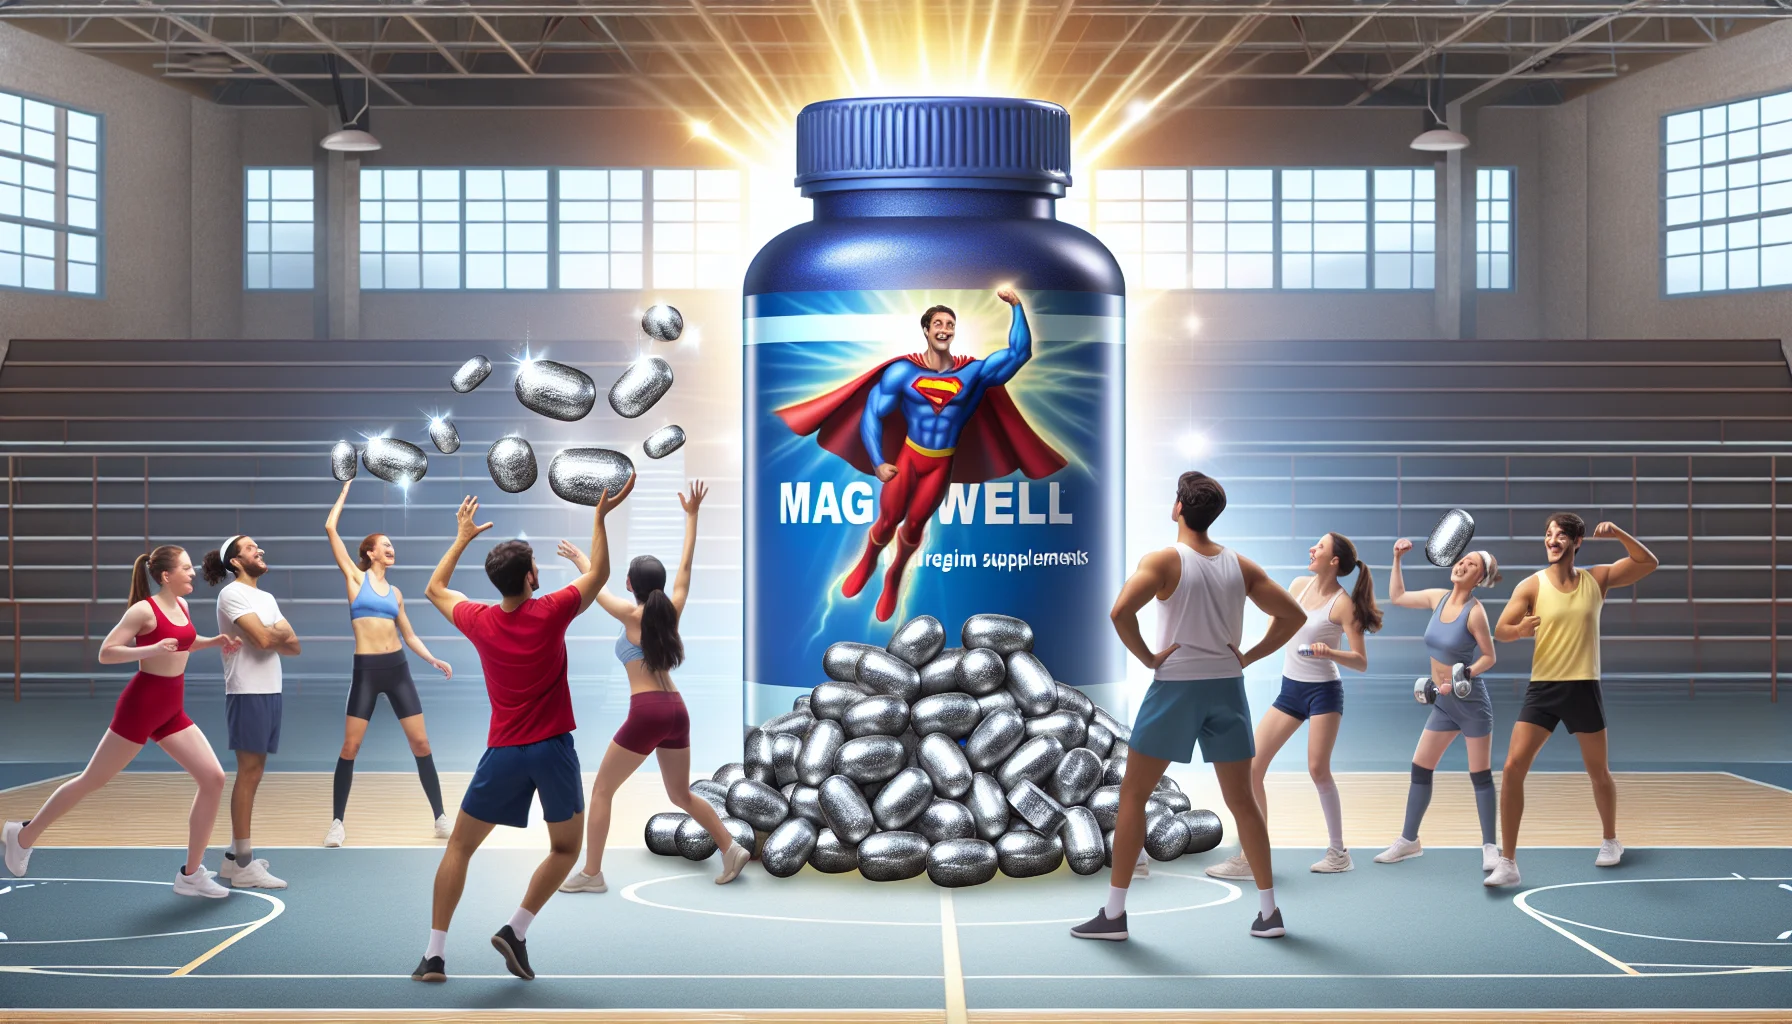 Show a comical scene set in a generic gymnasium where individuals of varying descents, such as Caucasian, Hispanic, and Middle-Eastern, and representing both genders, are participating in various sports activities. In the center of the image, depict a large, slightly exaggerated, bottle of 'Magwell Magnesium' supplements radiating a superhero-esque glow. Make this bottle appear as if it's happily interacting with the surrounding athletes. Care to add an exaggerated sparkle to metallic magnesium pills spilling from the bottle, floating in the air, indicating their positive impact on the athletes' performance.